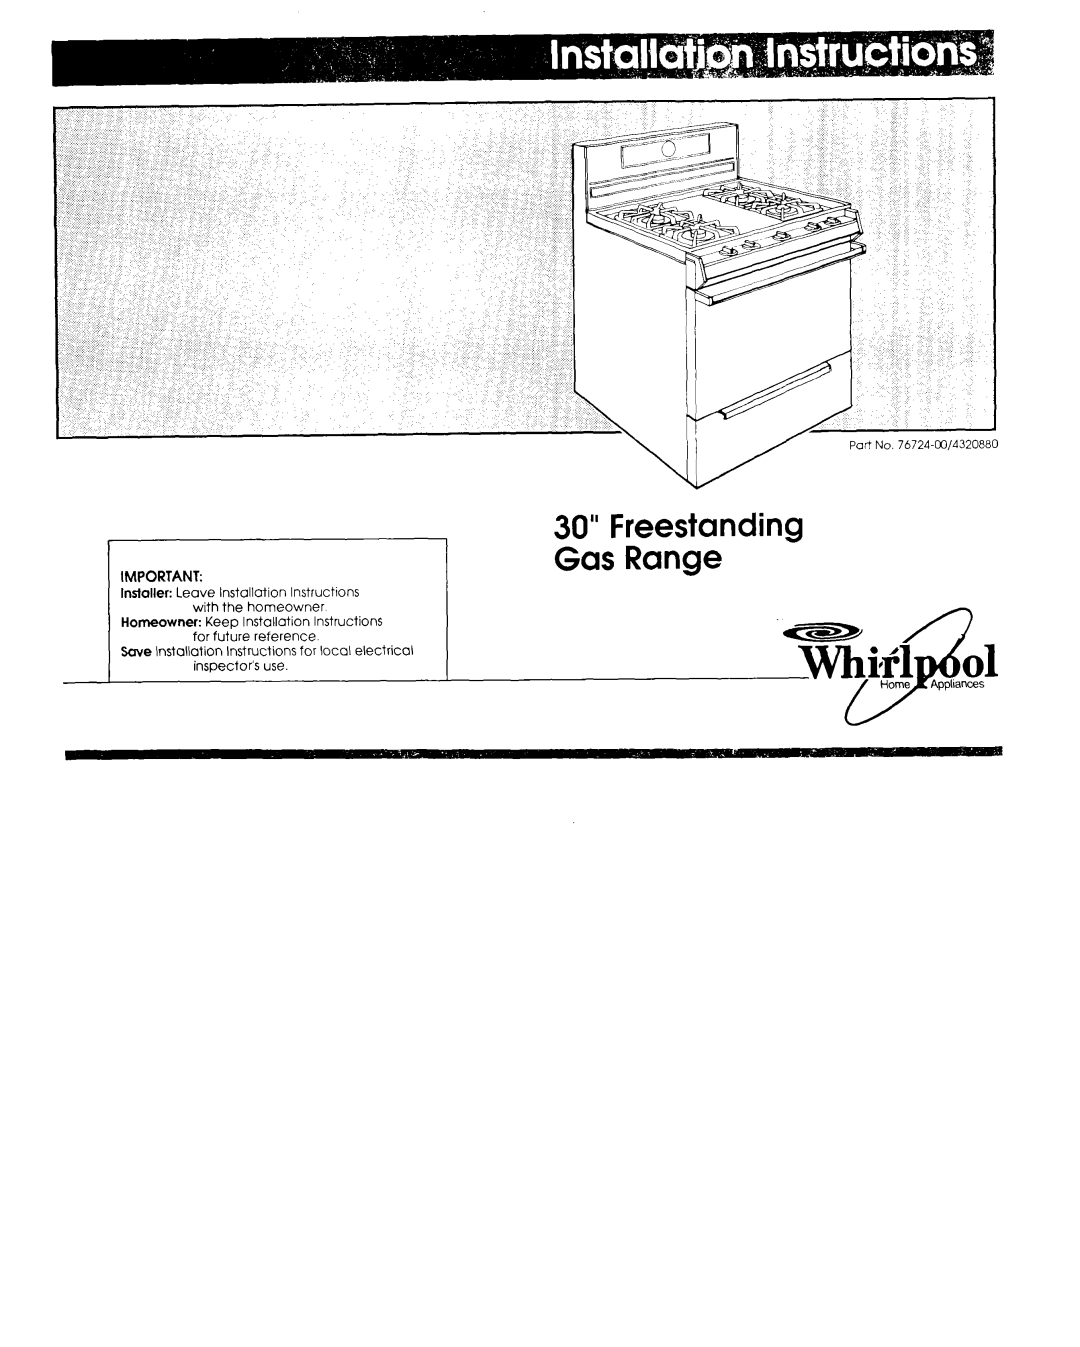 Whirlpool 76724.CO/4320880 installation instructions Homeowner Keep Installation Instructions, for future reference 